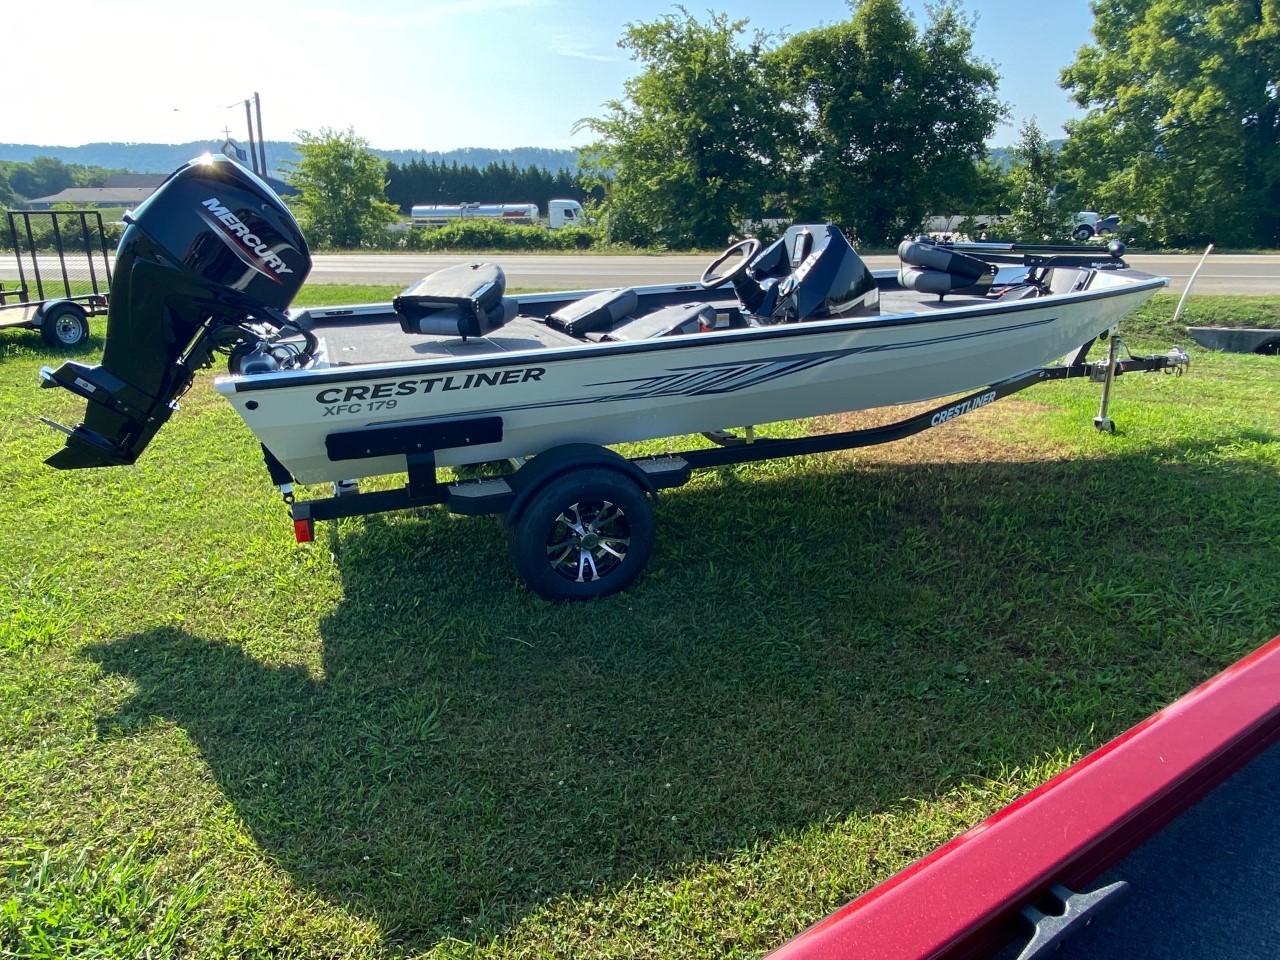 2022 Crestliner XFC 17 Fishing boat for sale in College Dale, TN - image 3 